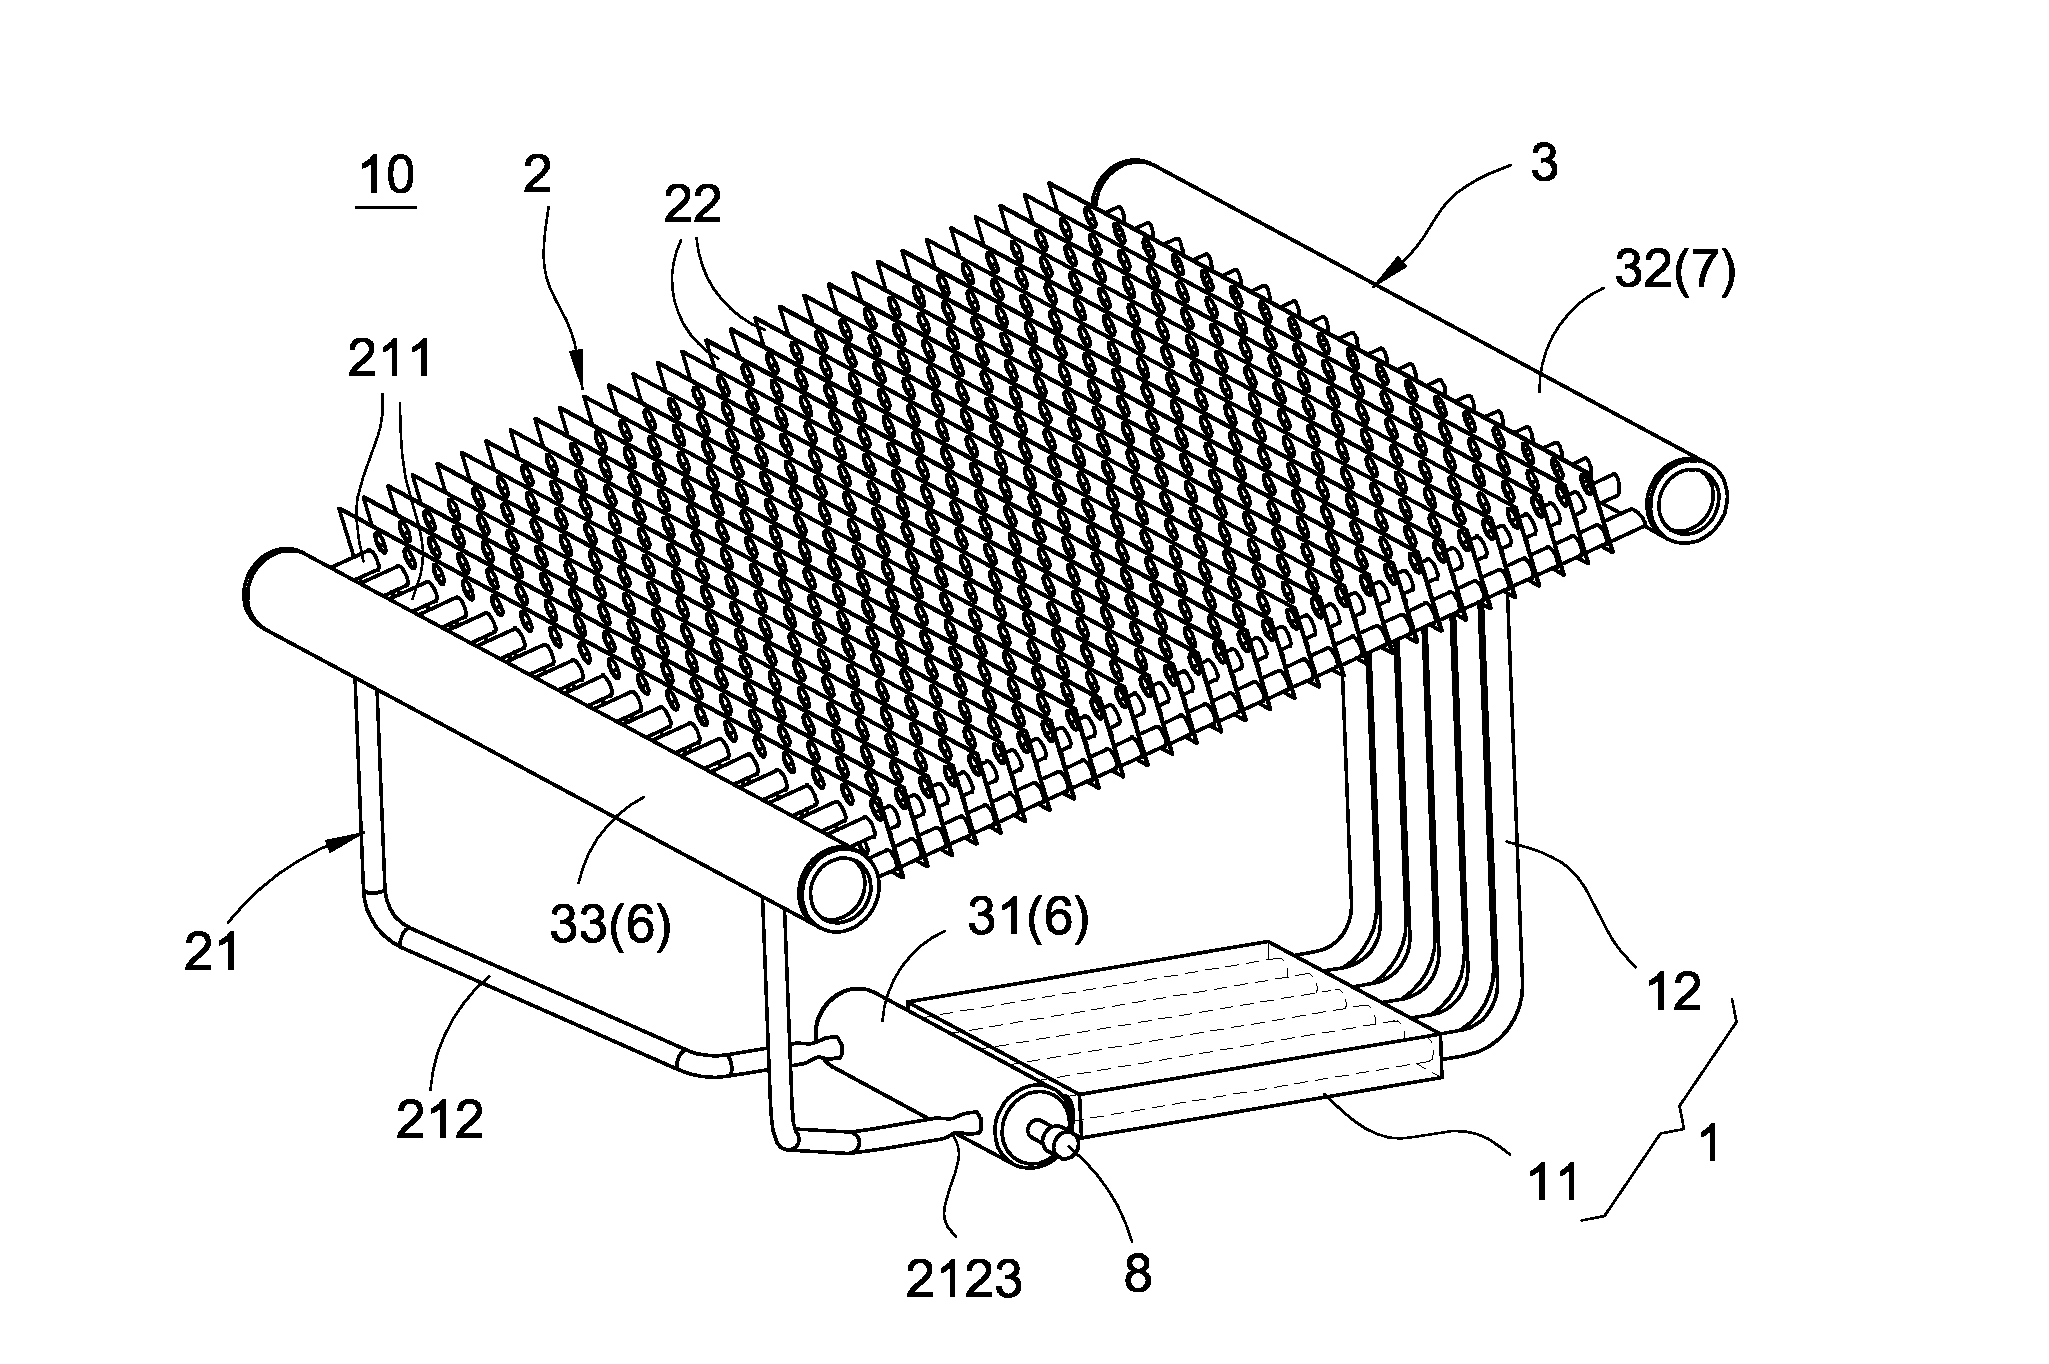 Loop thermosyphon cooling device